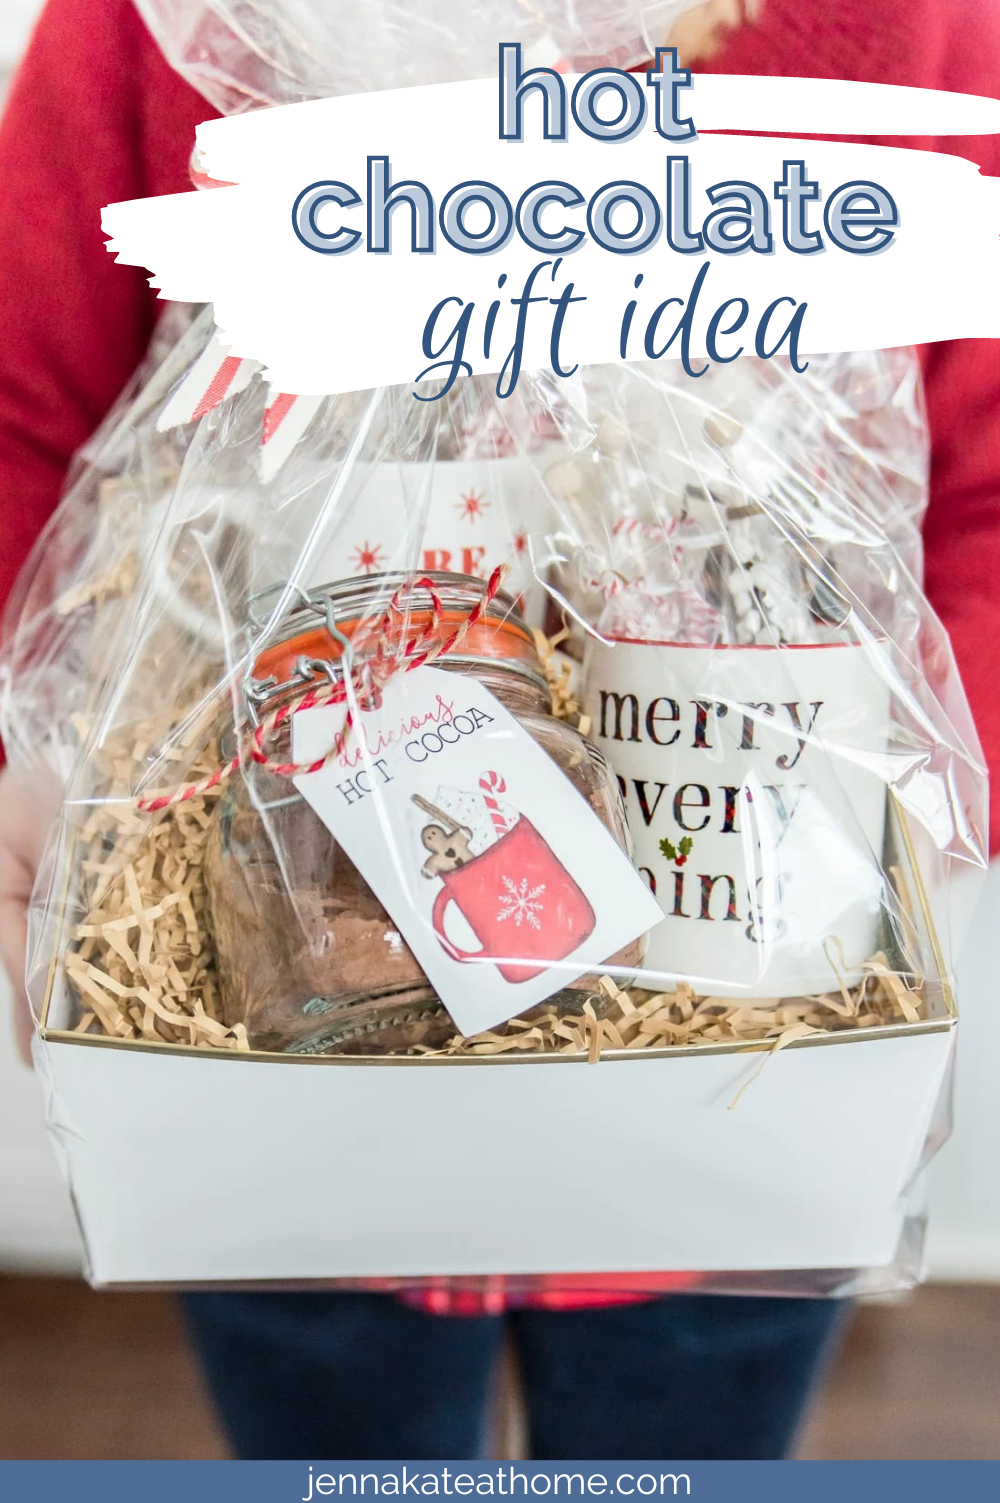 A basket with hot chocolate, mugs, and chocolates that a women is holding as a gift.